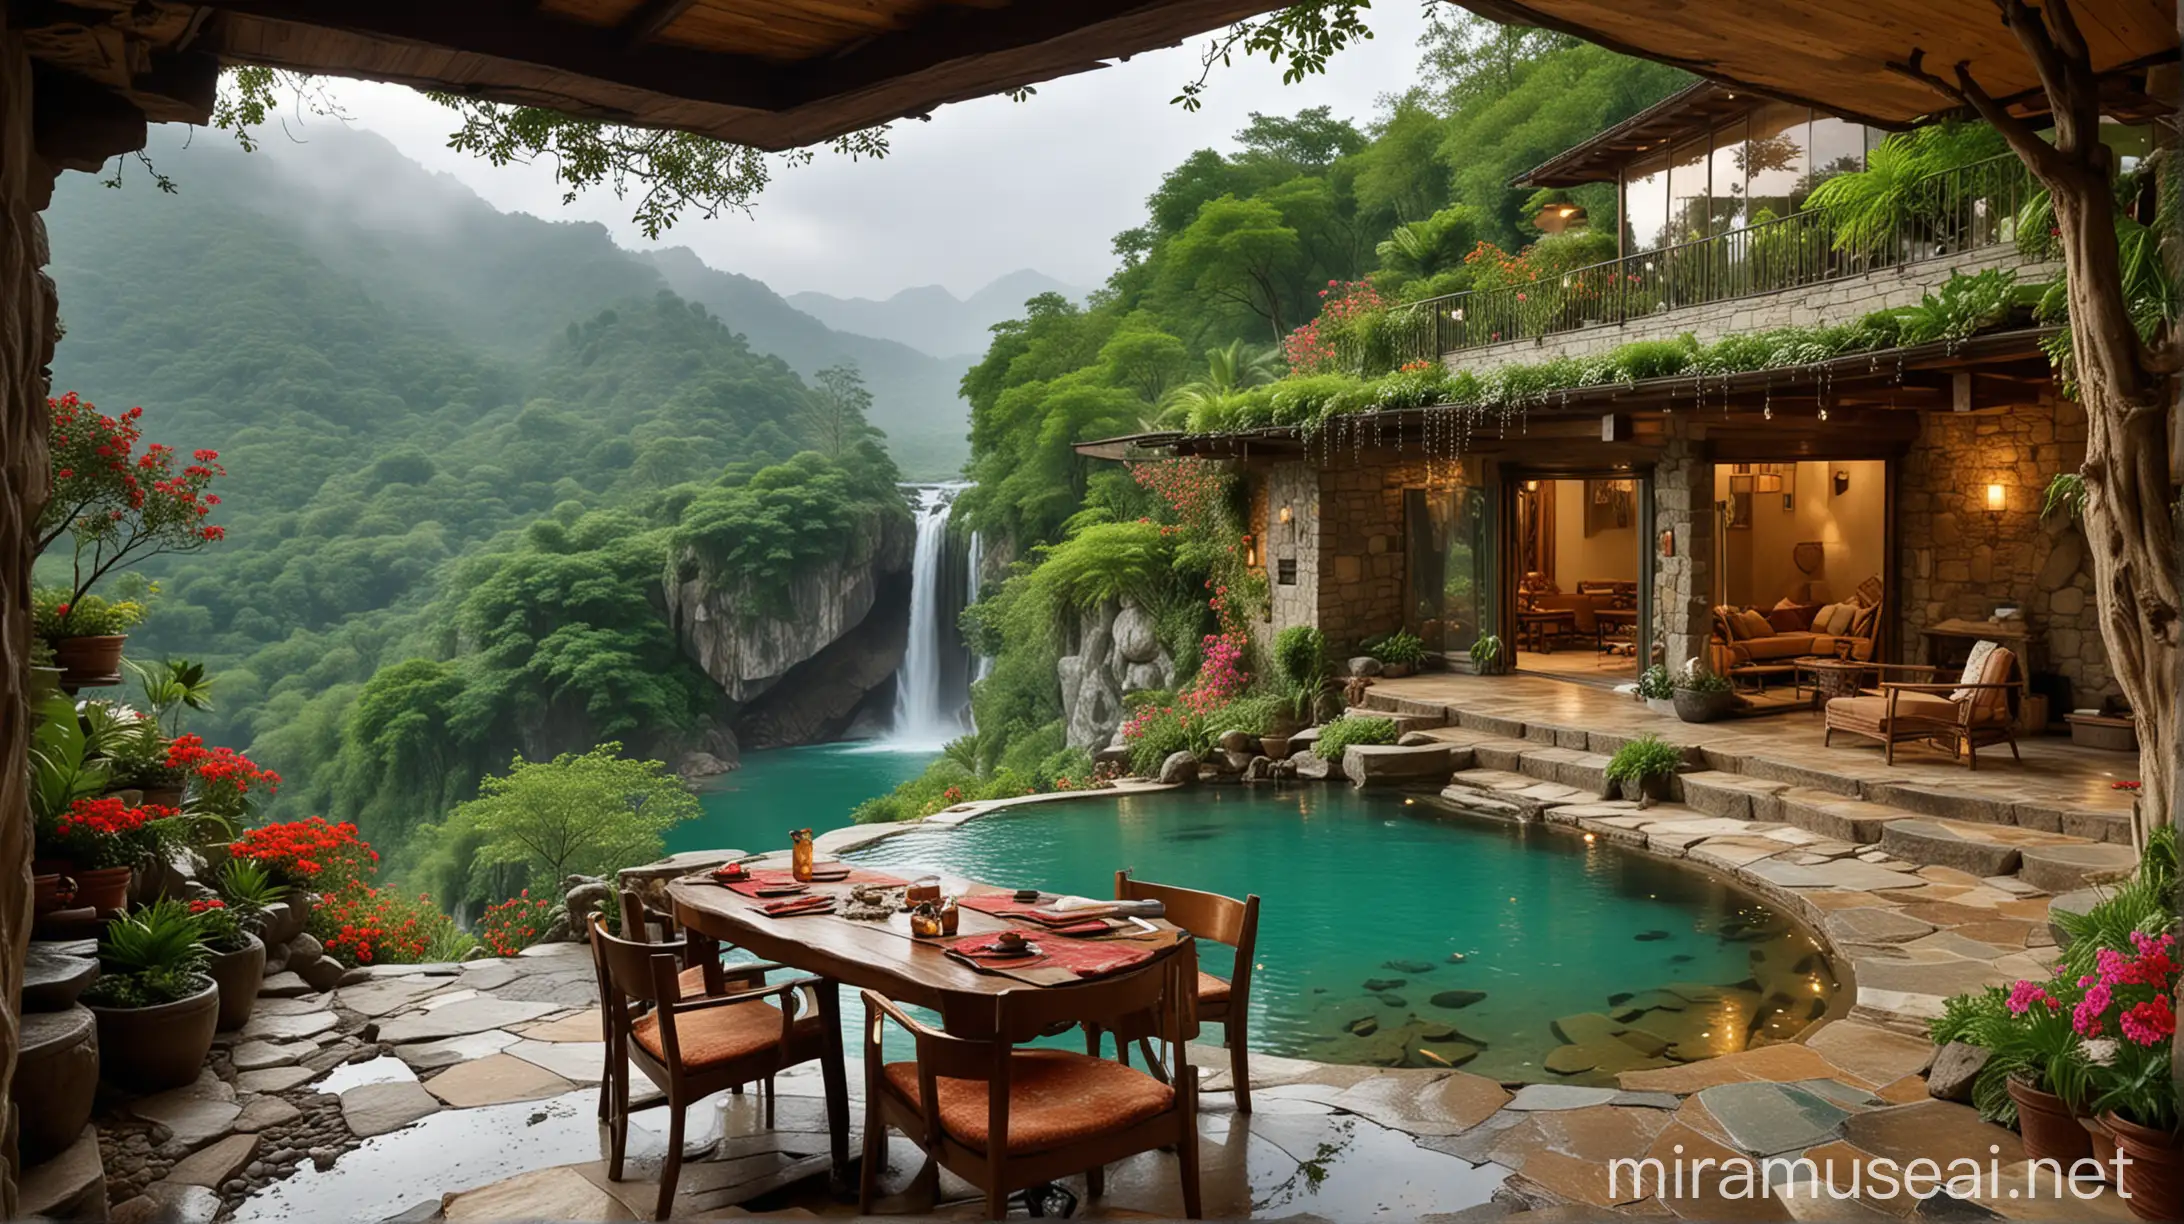 Majestic Waterfall House Romantic Moonsoon Scenery with Emerald Views